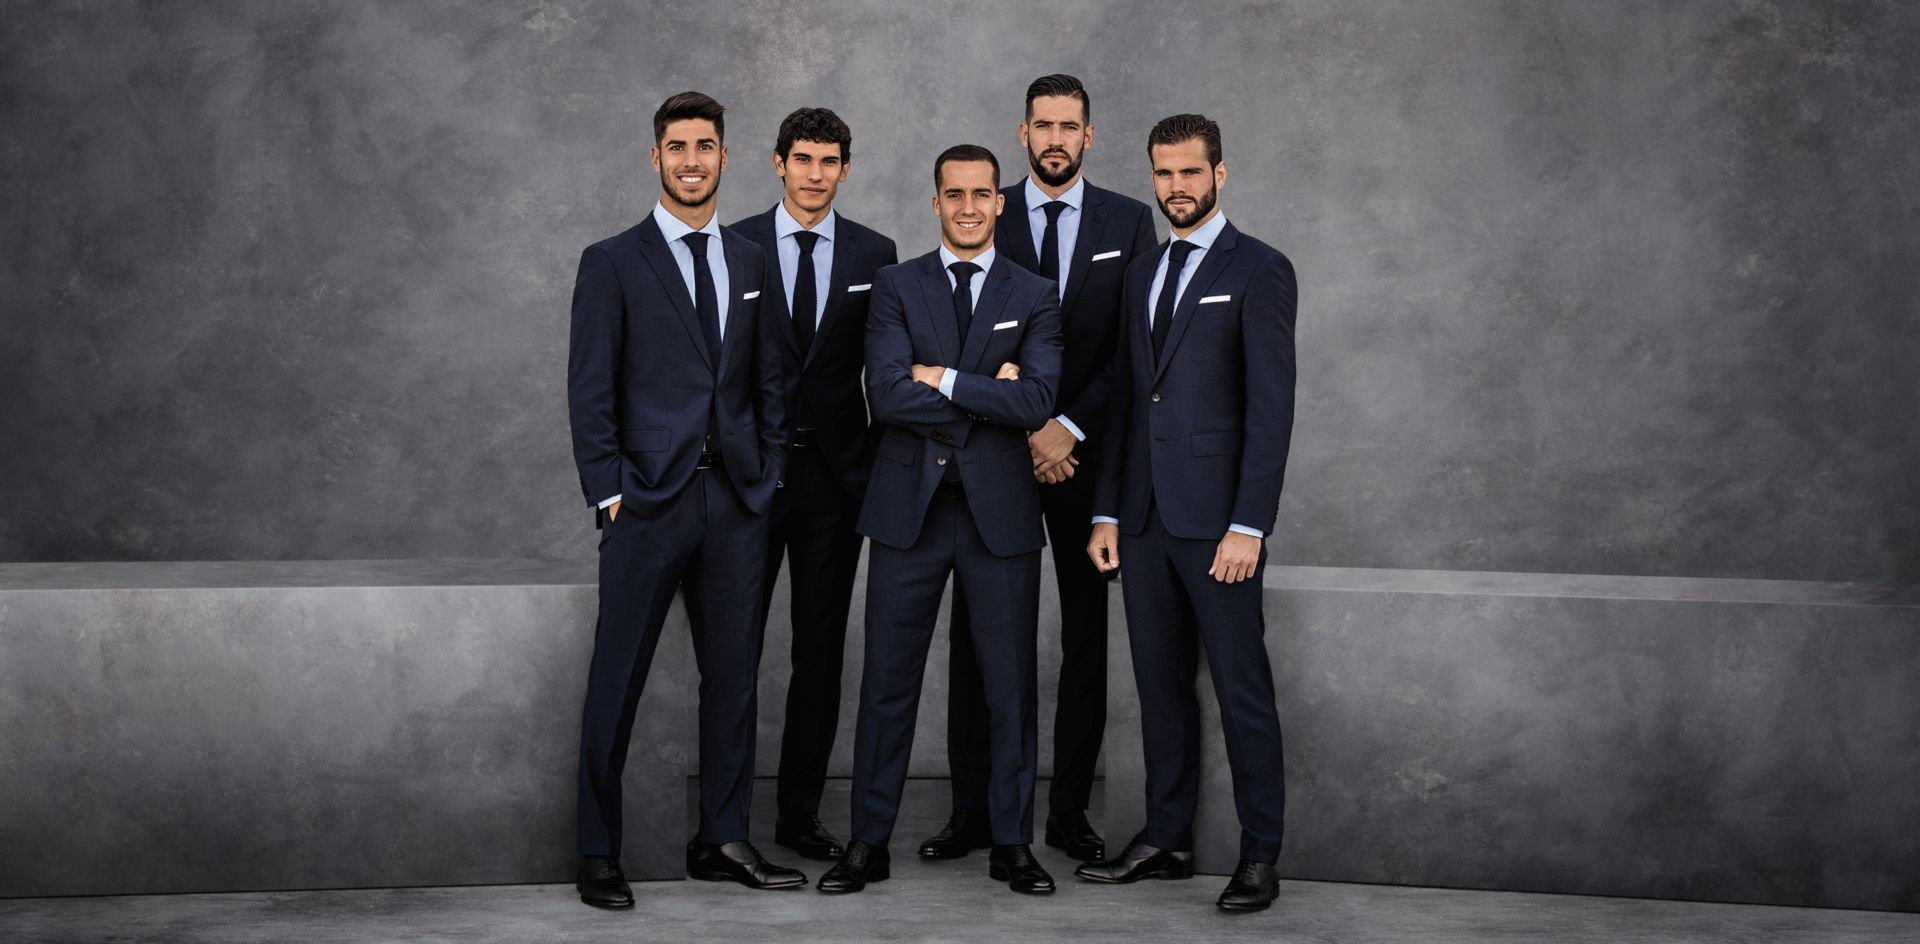 Real Madrid C. F. - Players BOSS | Suits & casual looks